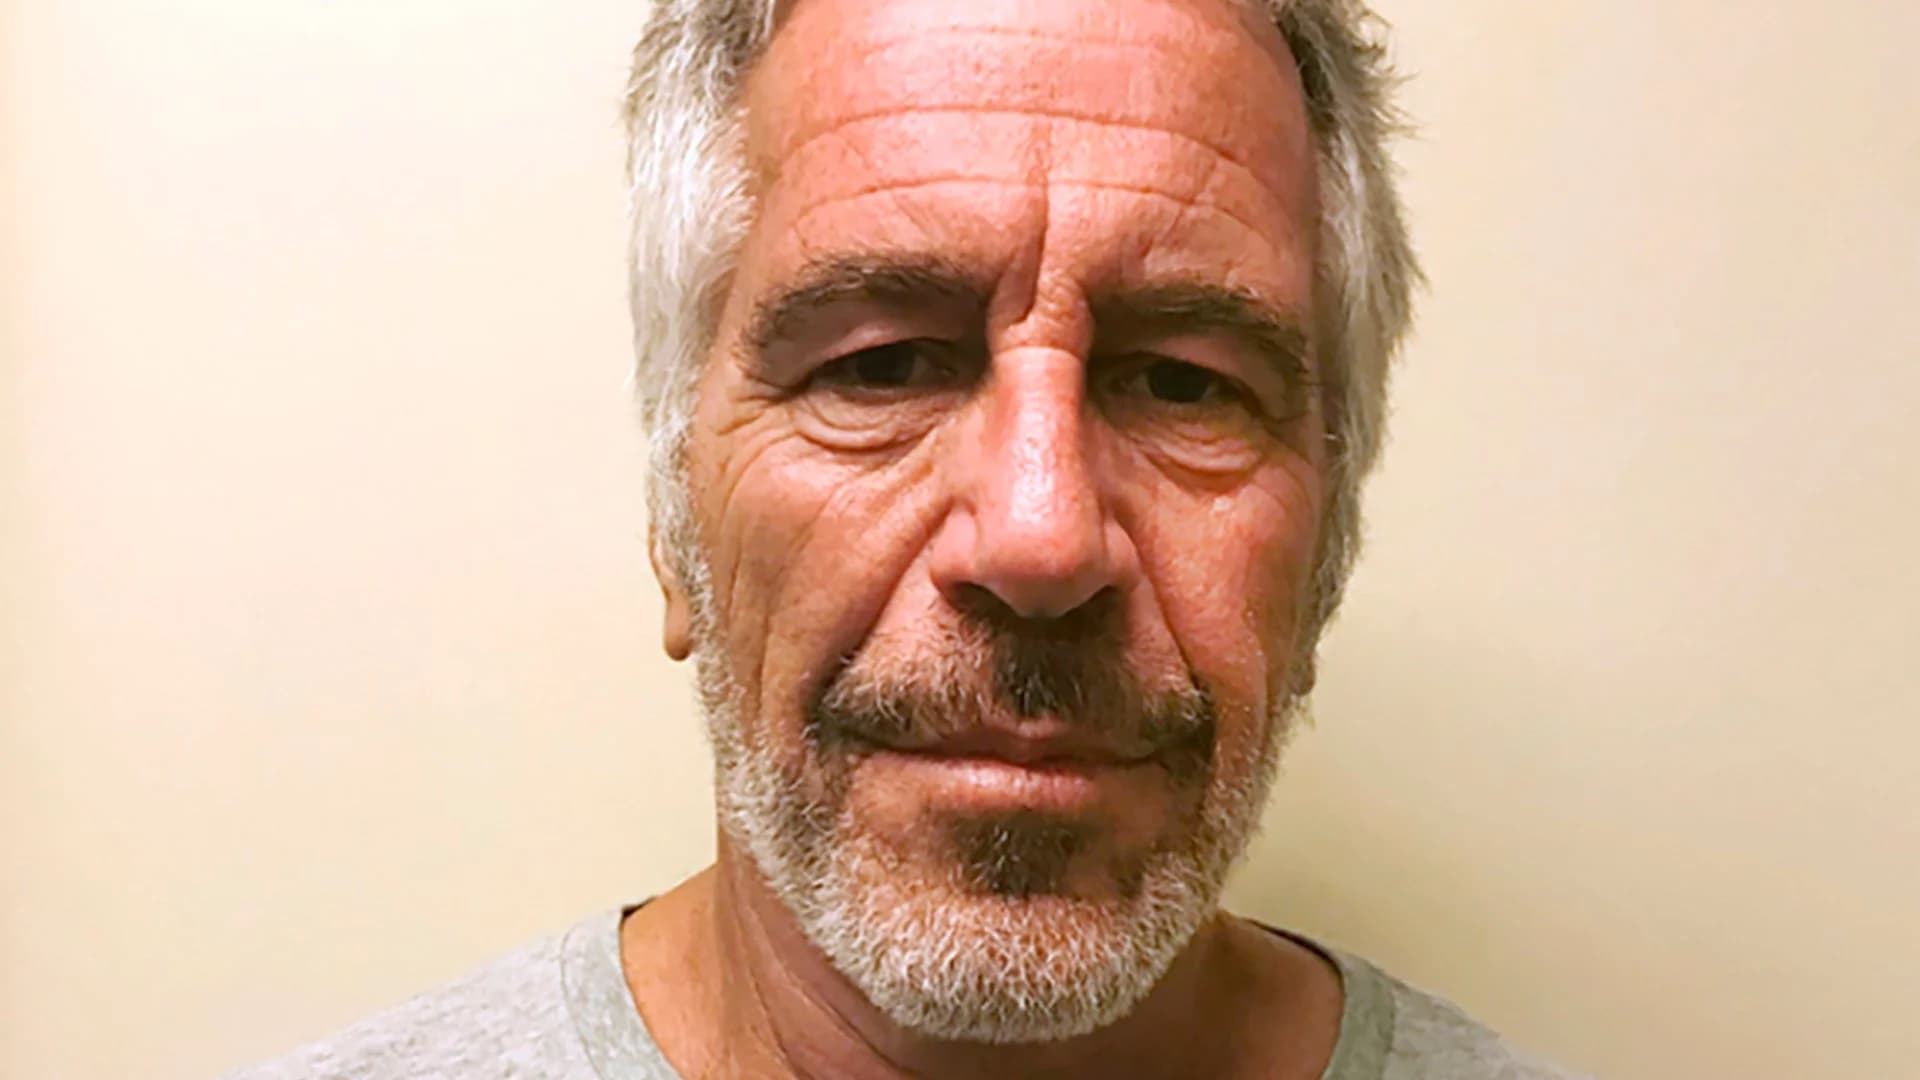 Doctor hired by family: Epstein injuries seem like homicide